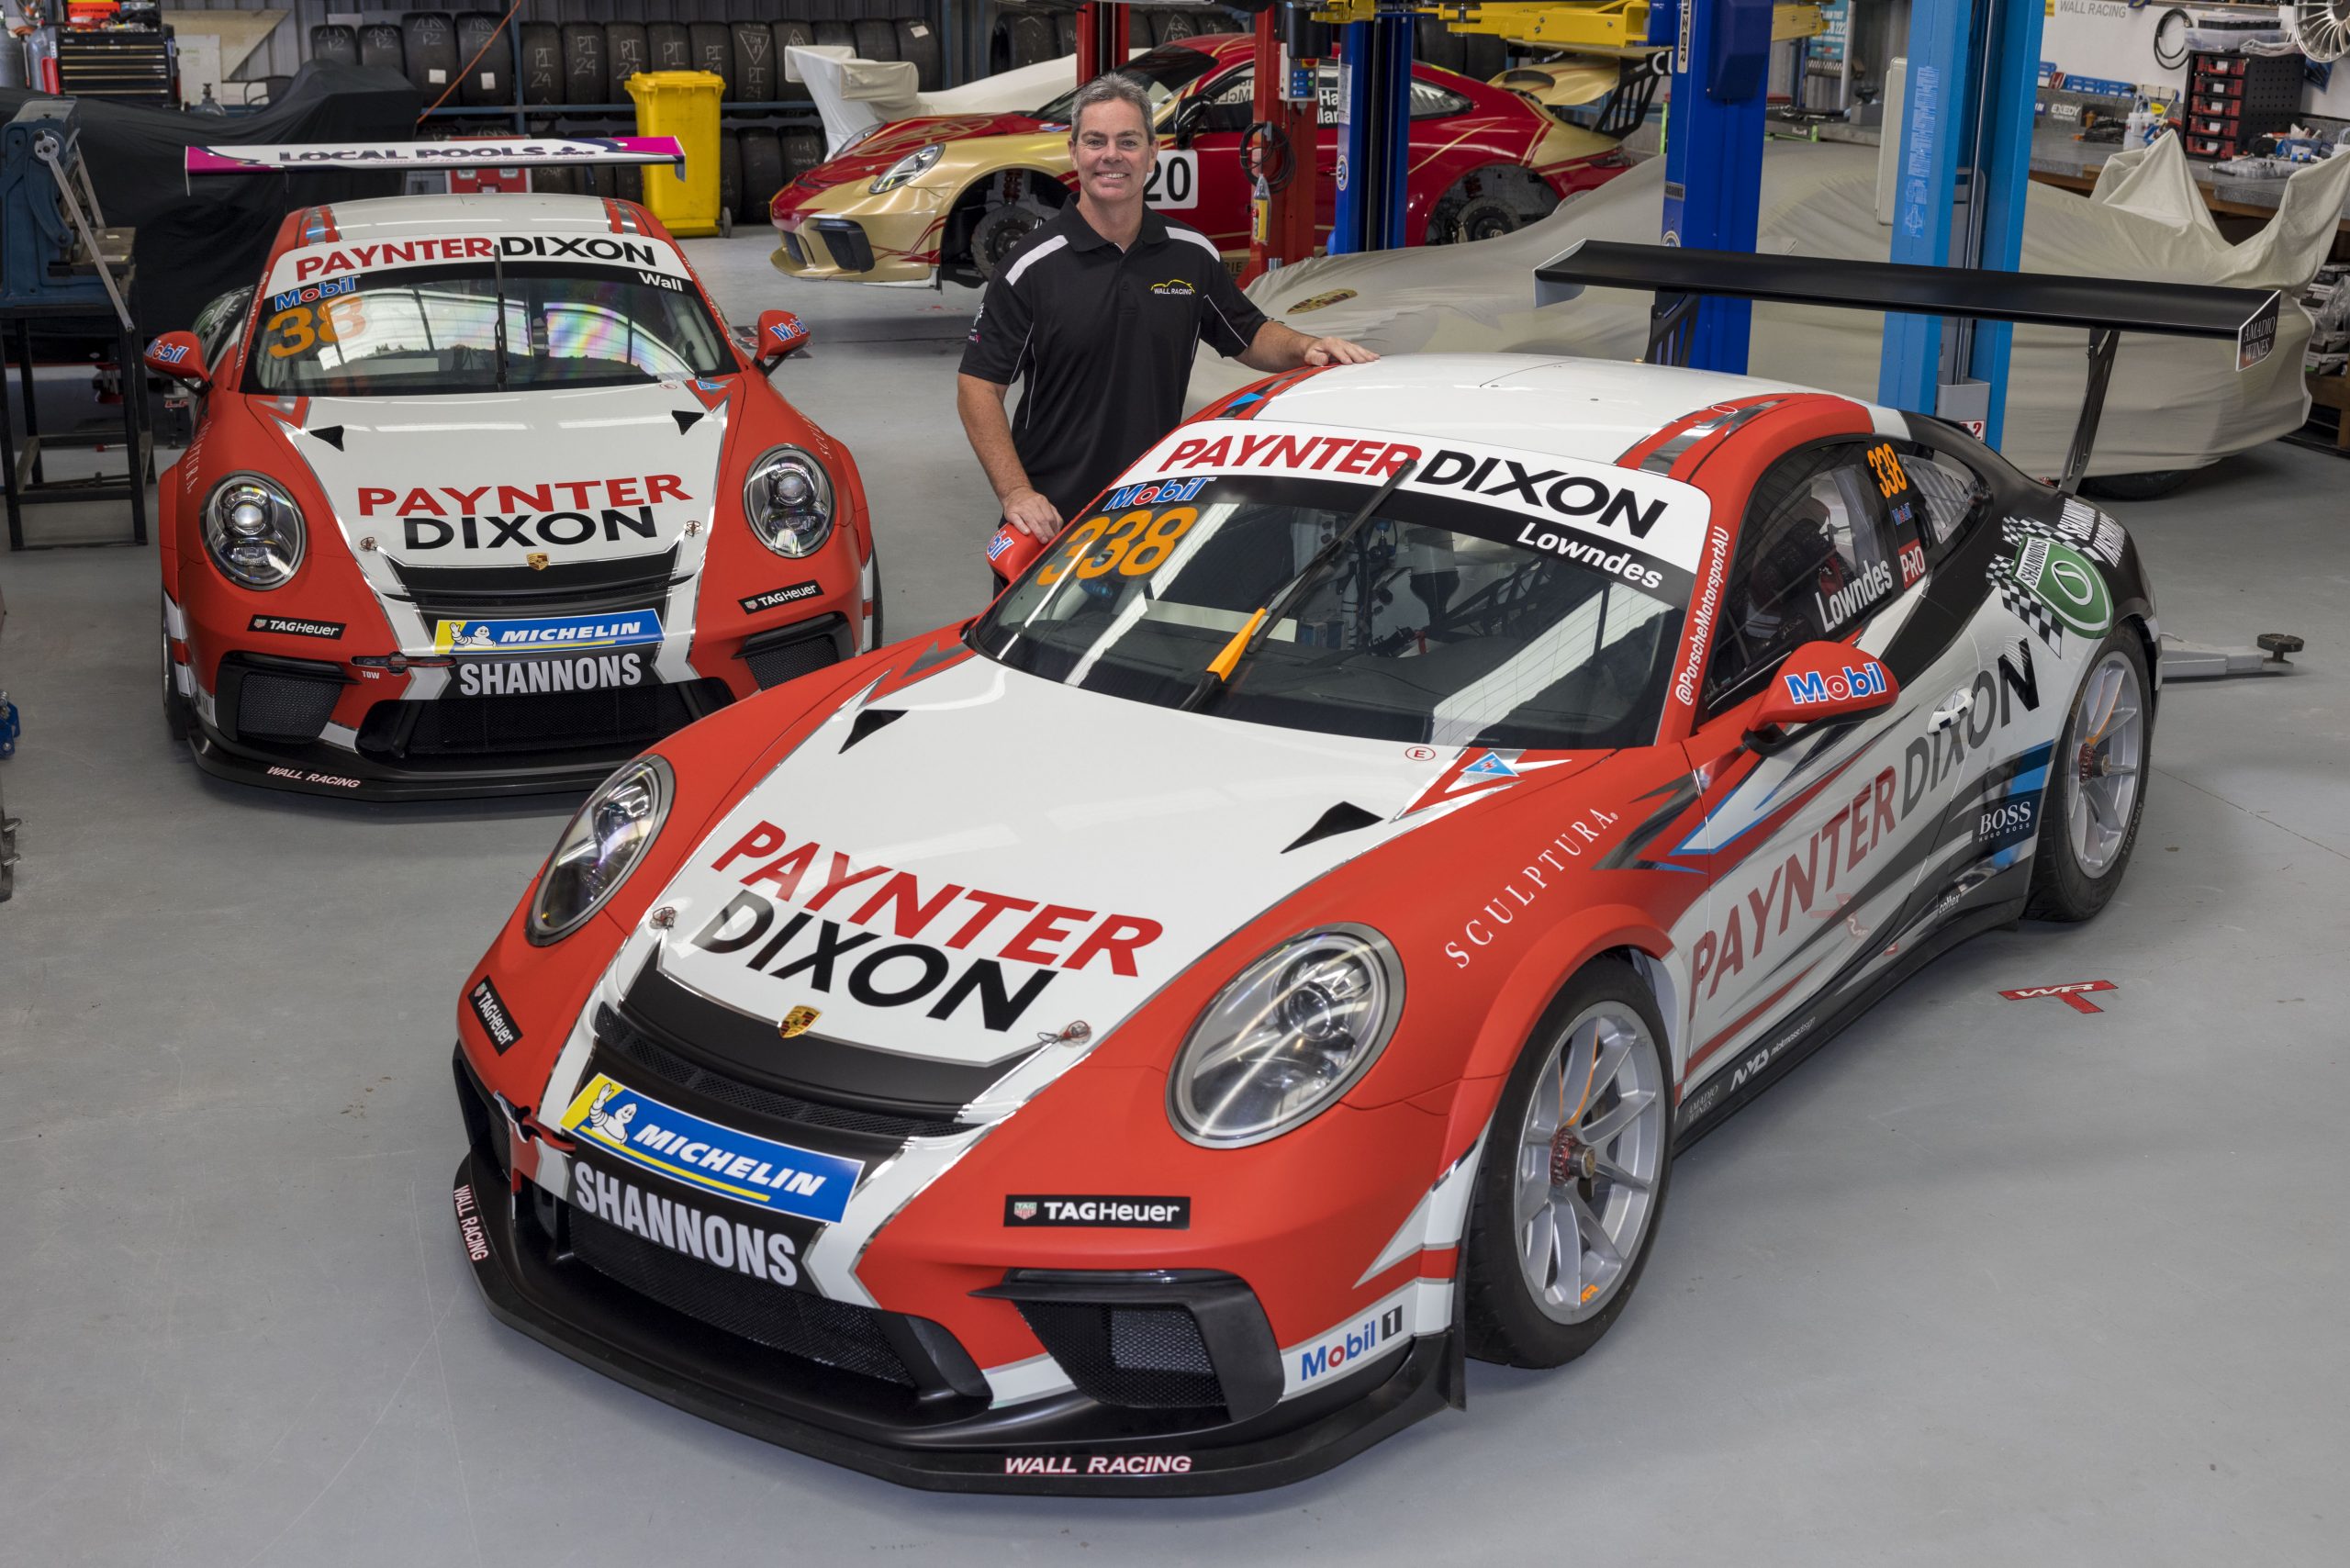 Lowndes and Wall reveal striking Porsche Paynter Dixon Carrera Cup Australia livery